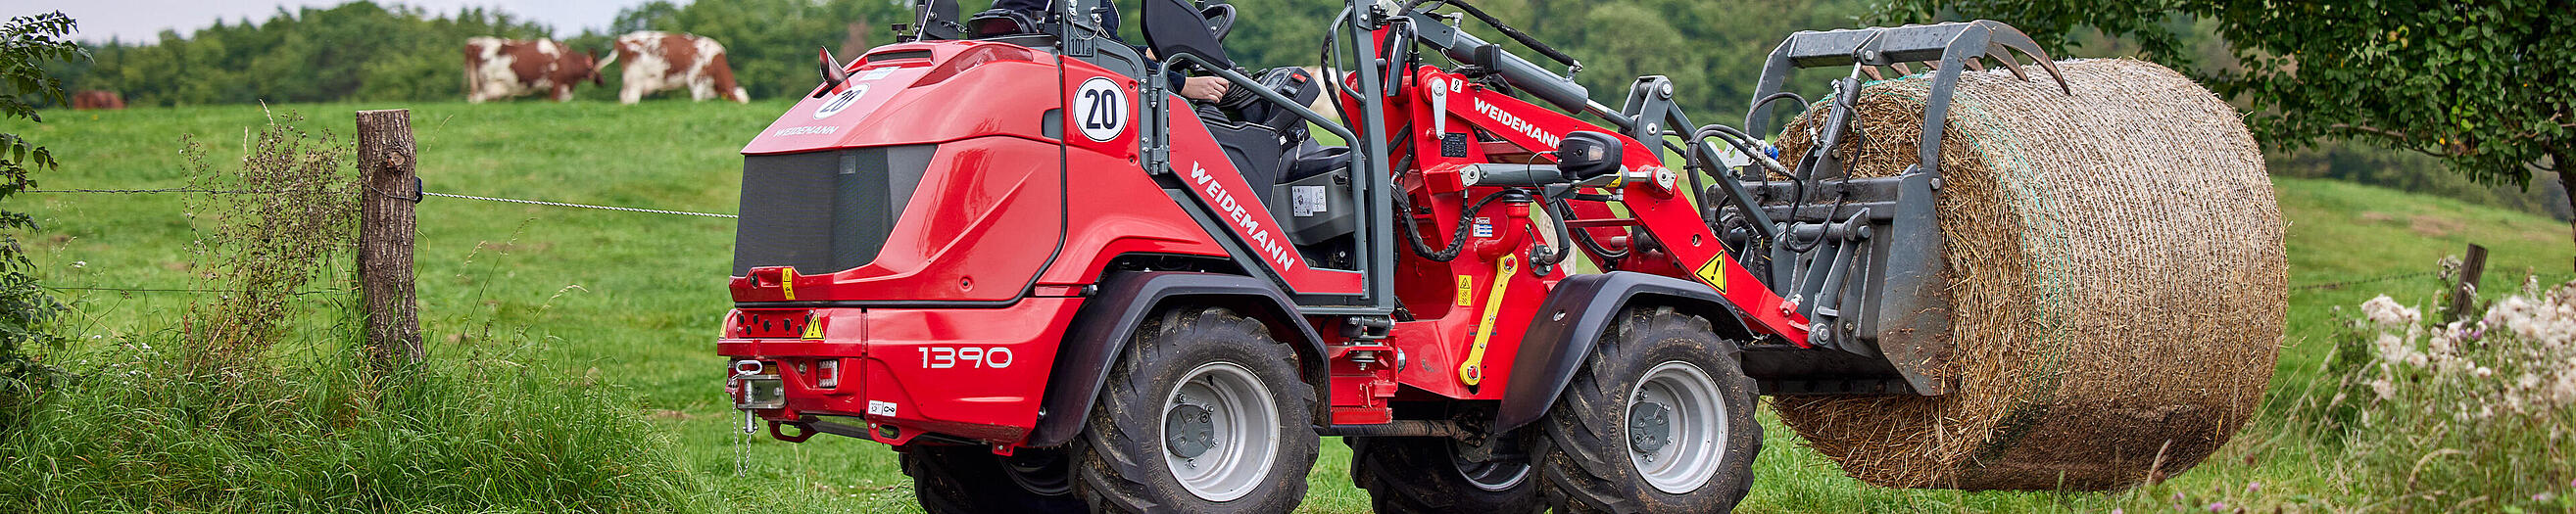 Weidemann Hoftrac 1390 overhead guard in use with fork and grab